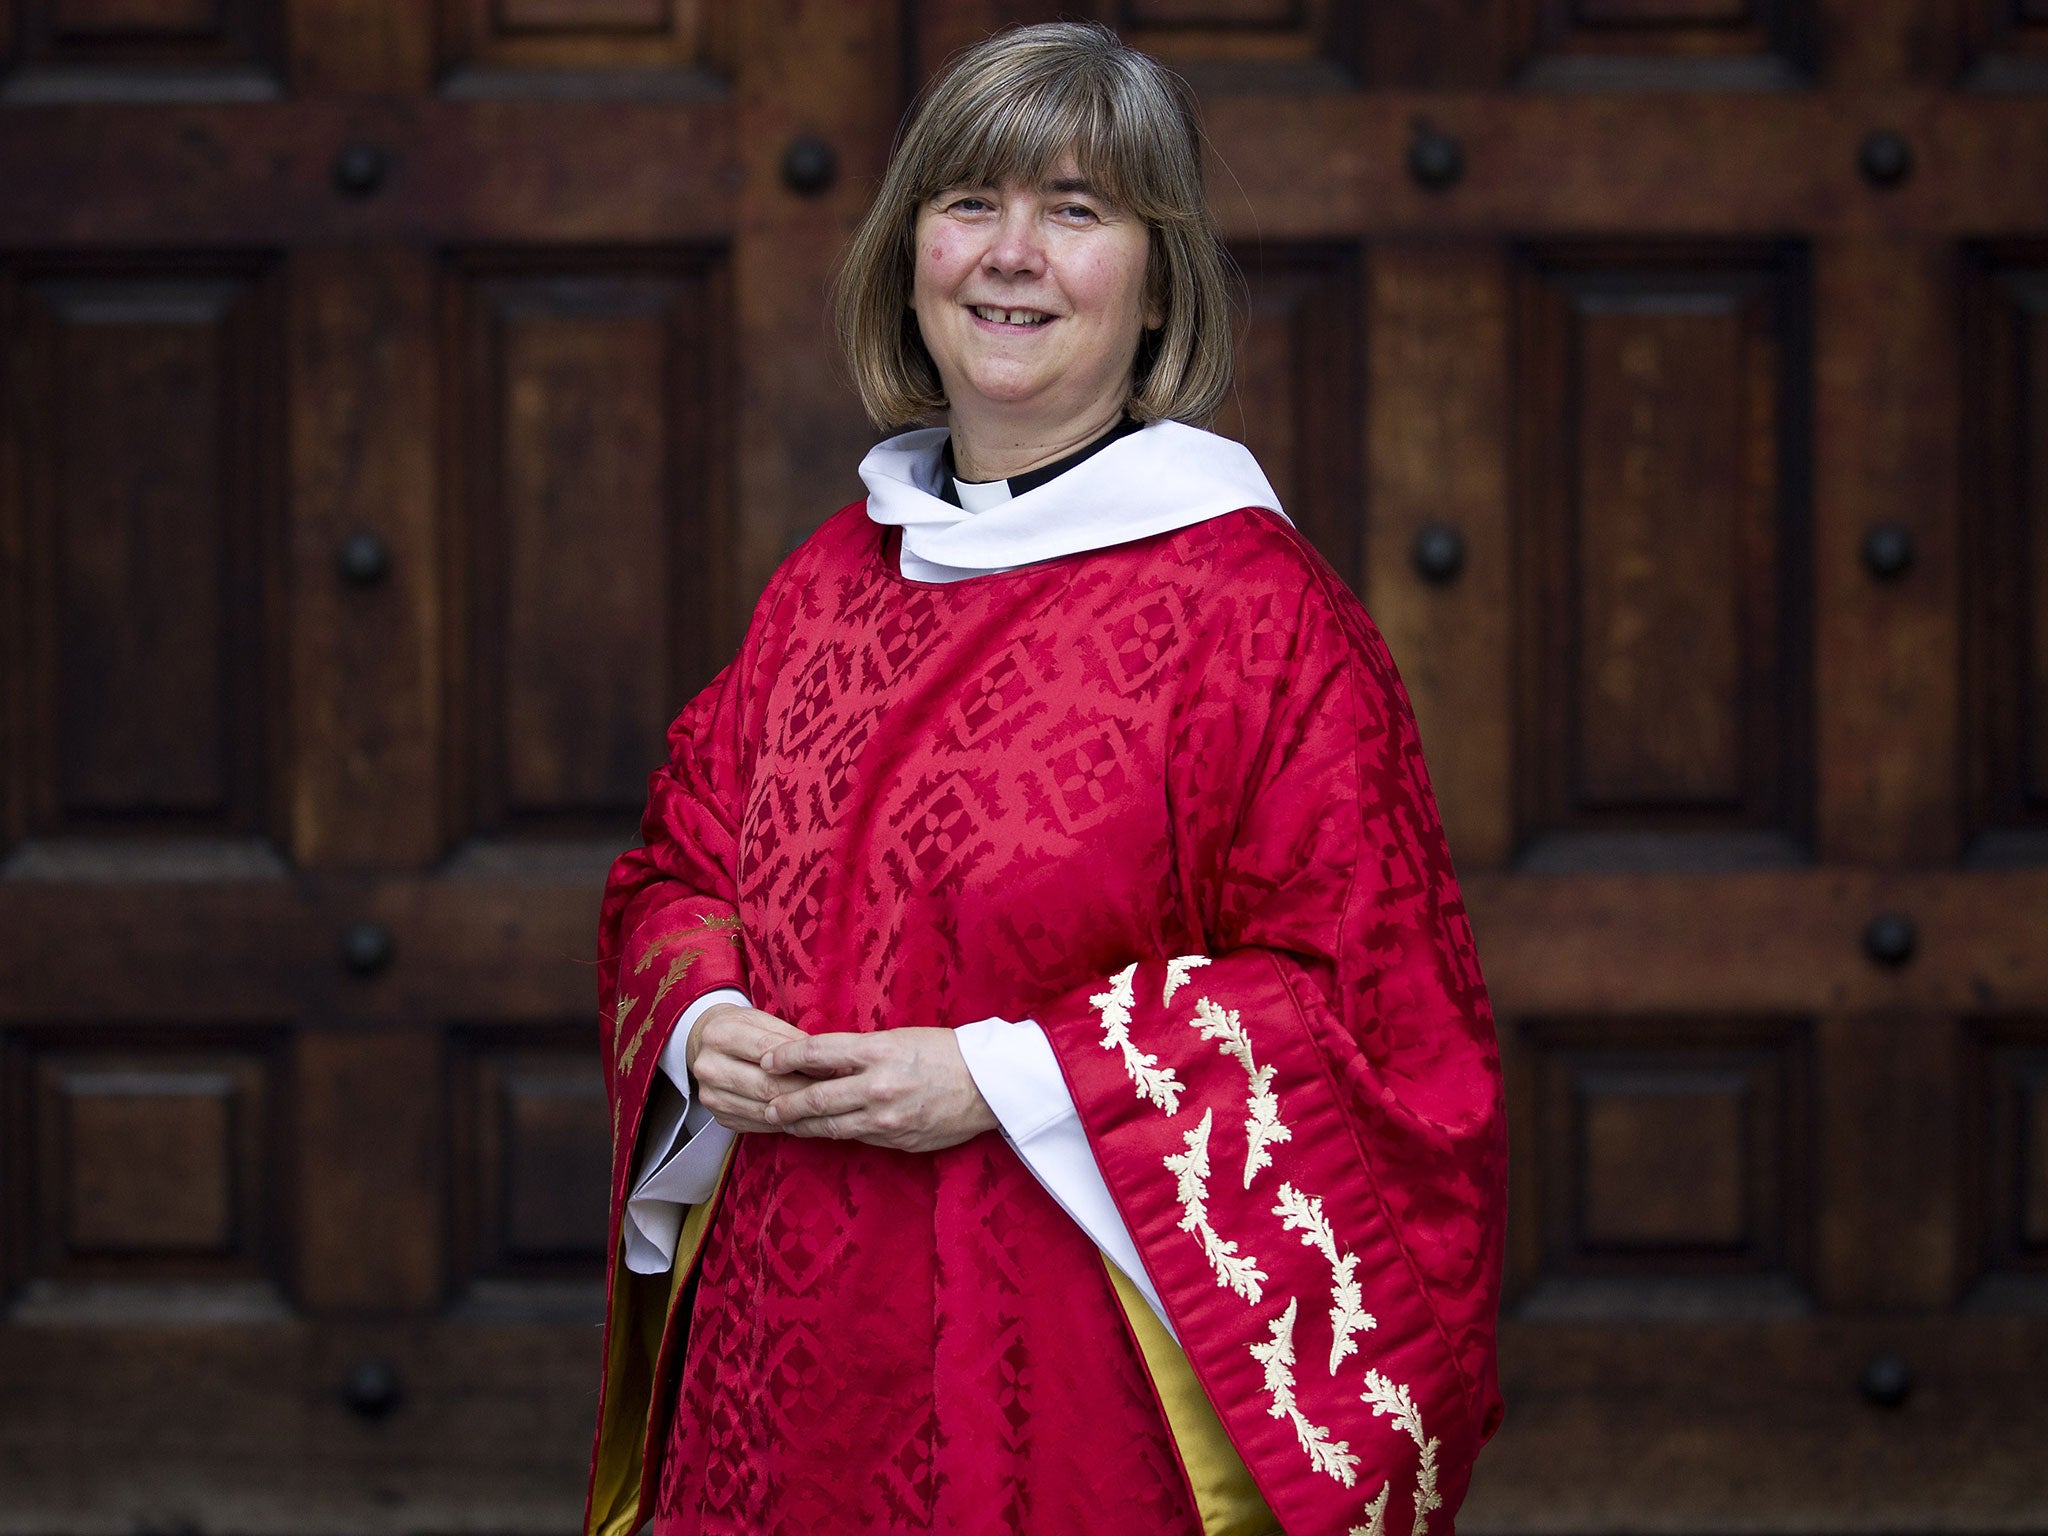 Canon Philippa Boardman was ordained as a priest in 1994